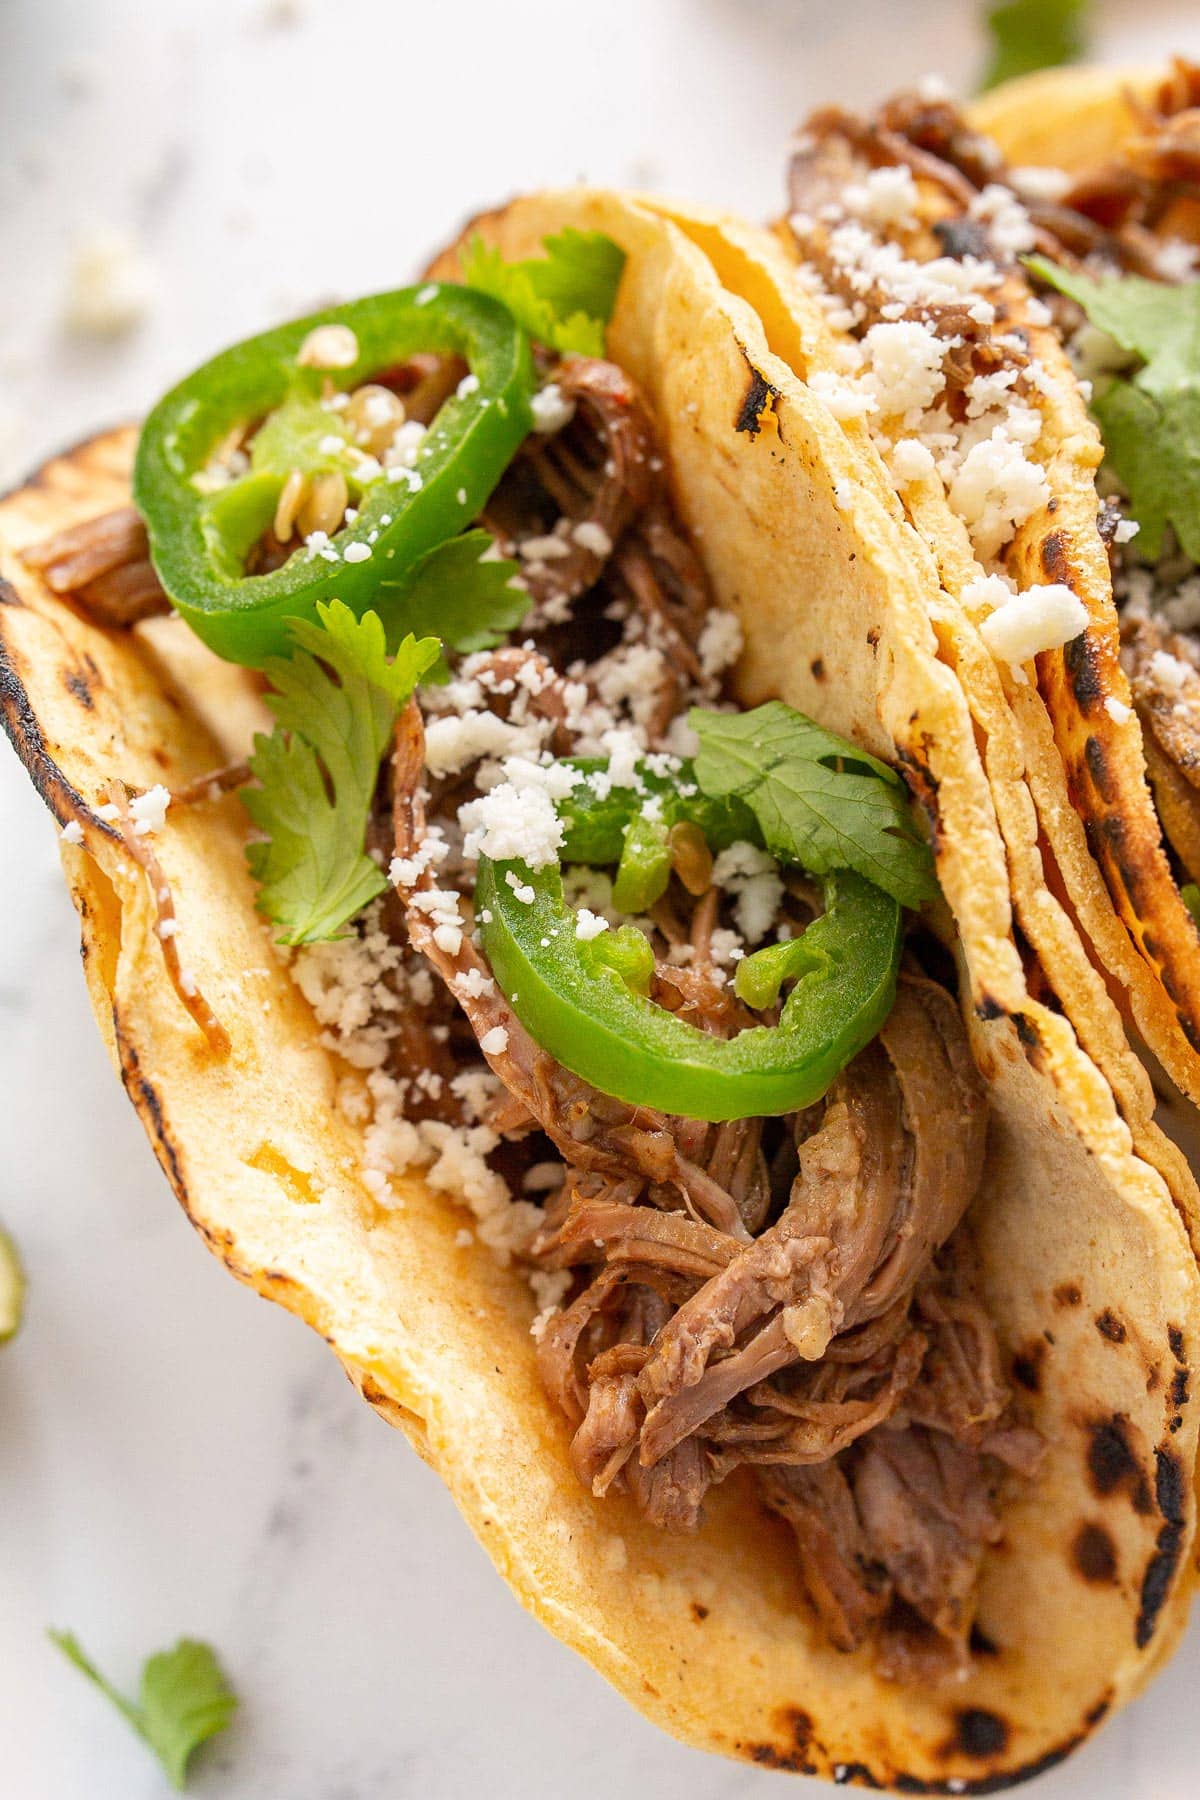 A corn tortilla stuffed with shredded slow cooker carne asada and topped with jalapeno slices and queso fresco.